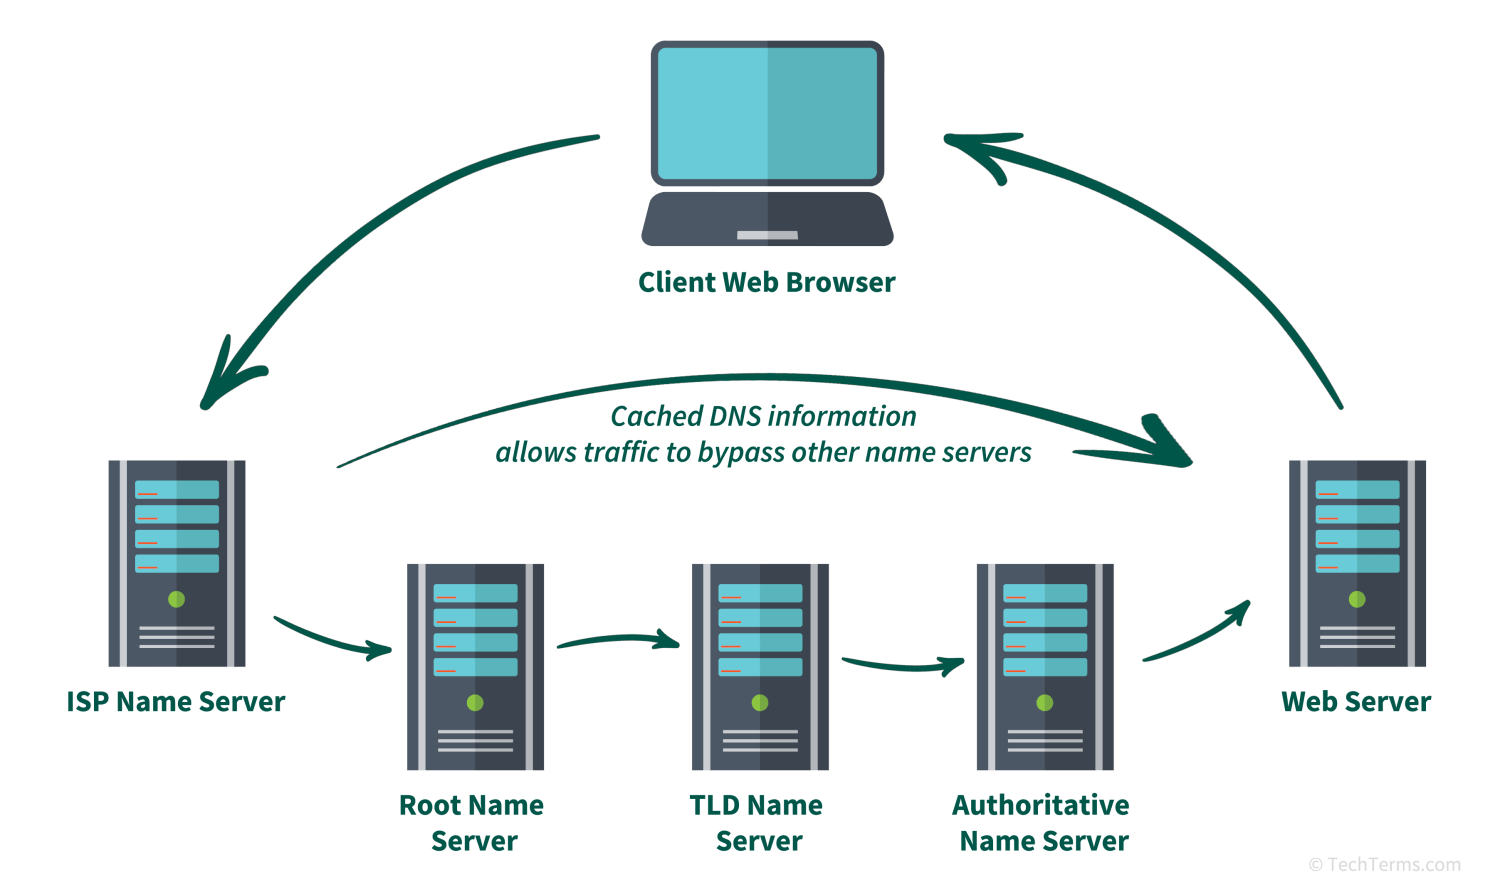 A DNS request involves multiple name servers before it routes the request to the correct web server